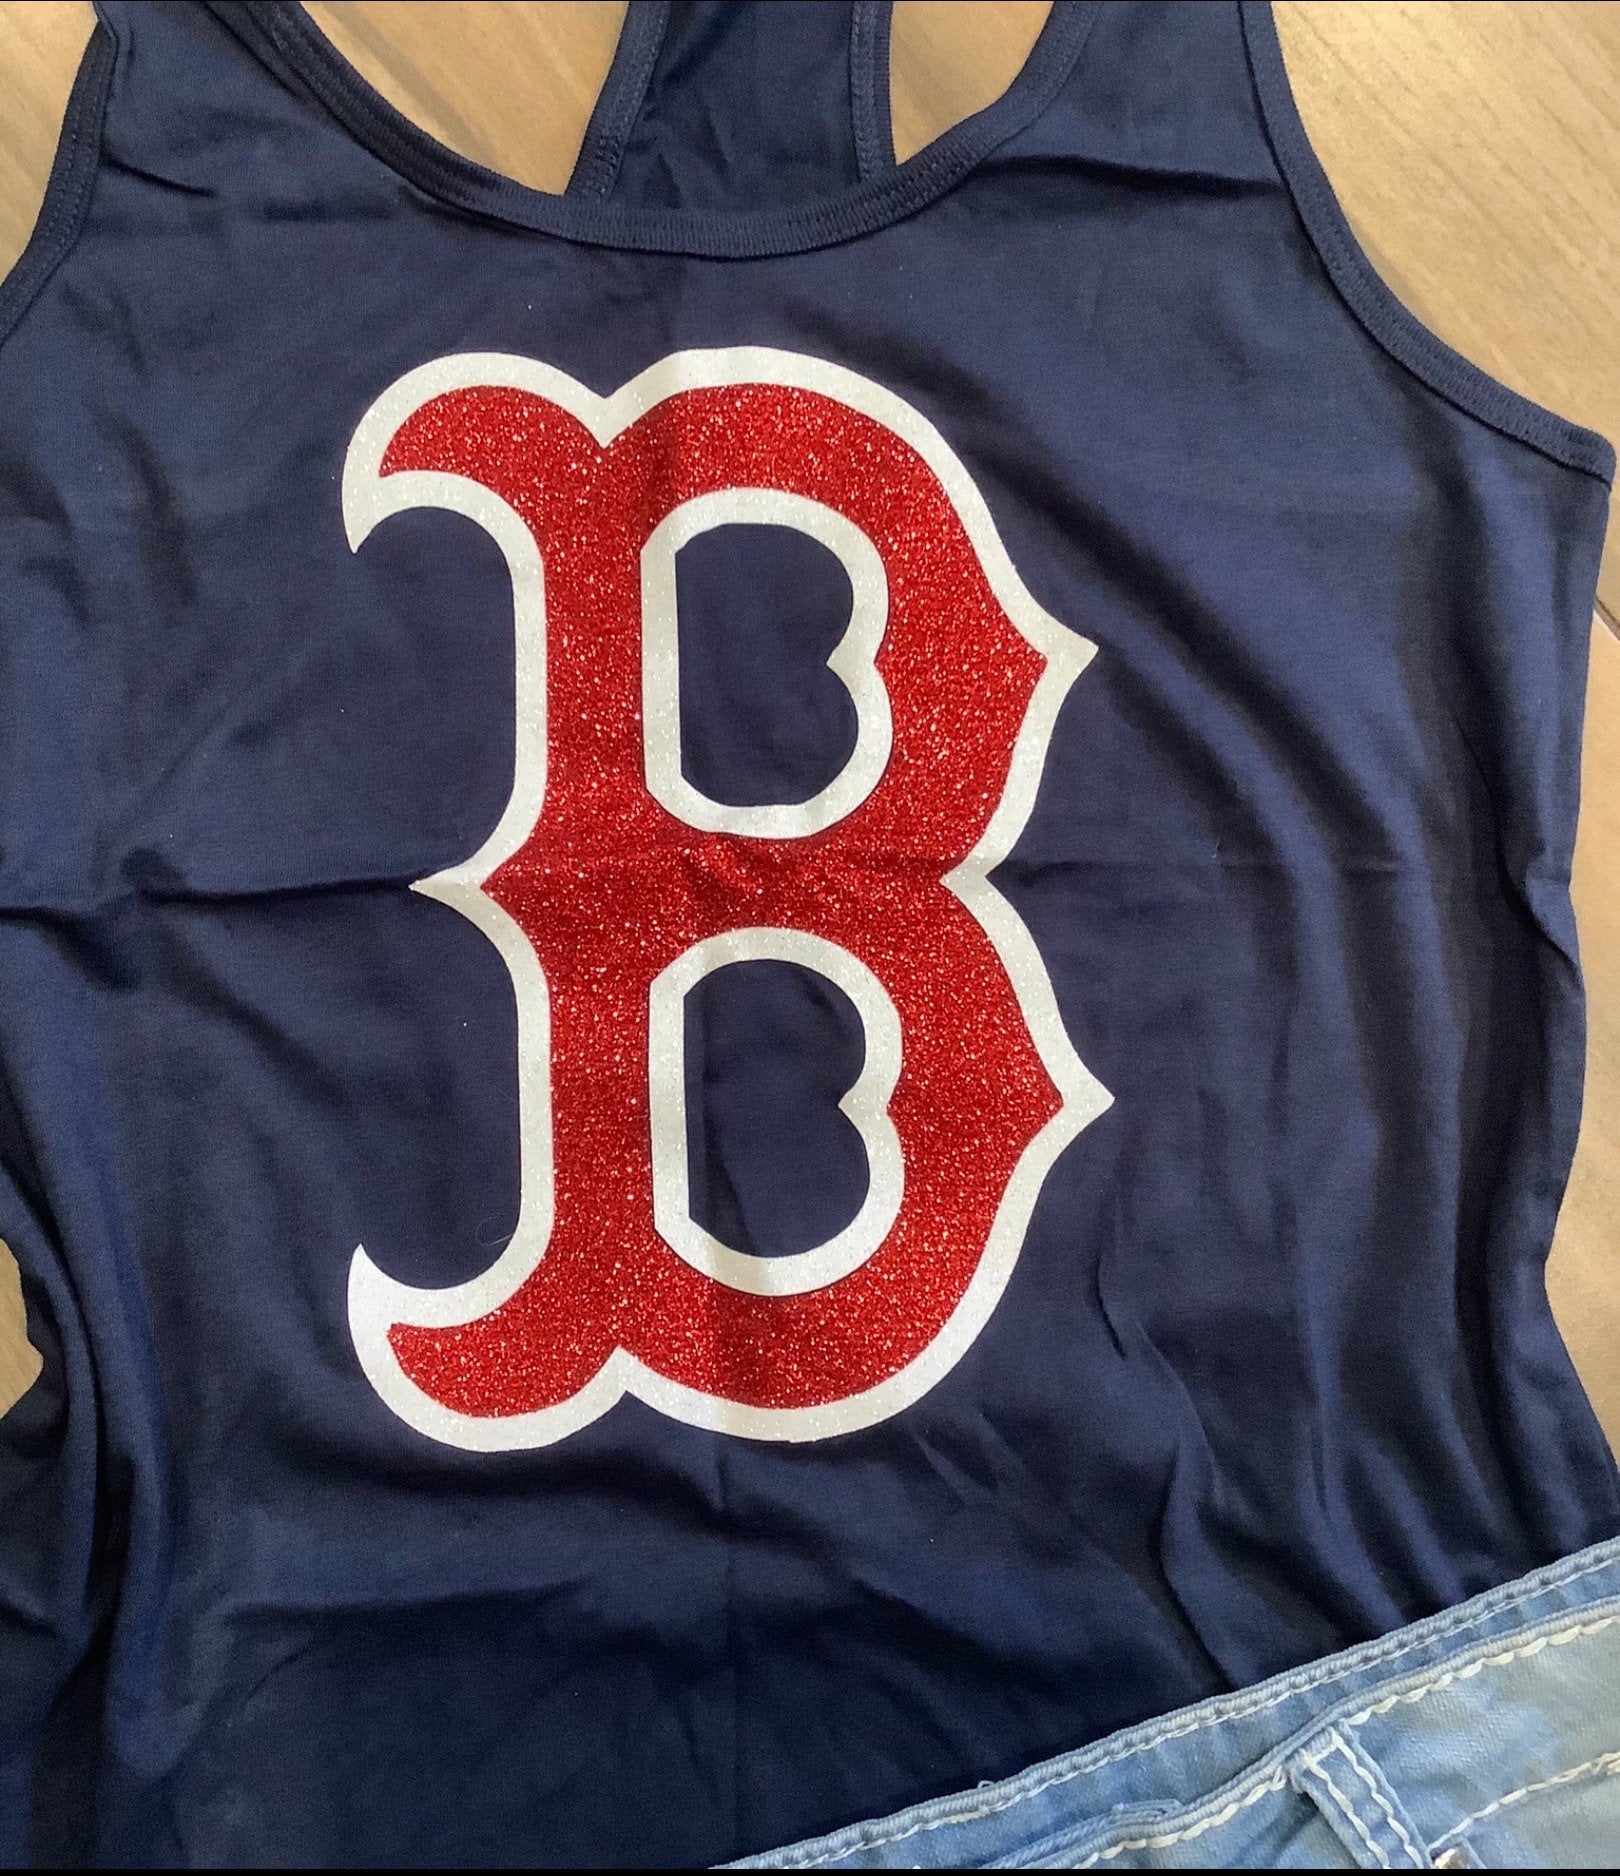 Red Sox Heart, Boston Red Sox T-Shirt For Women - Personalized